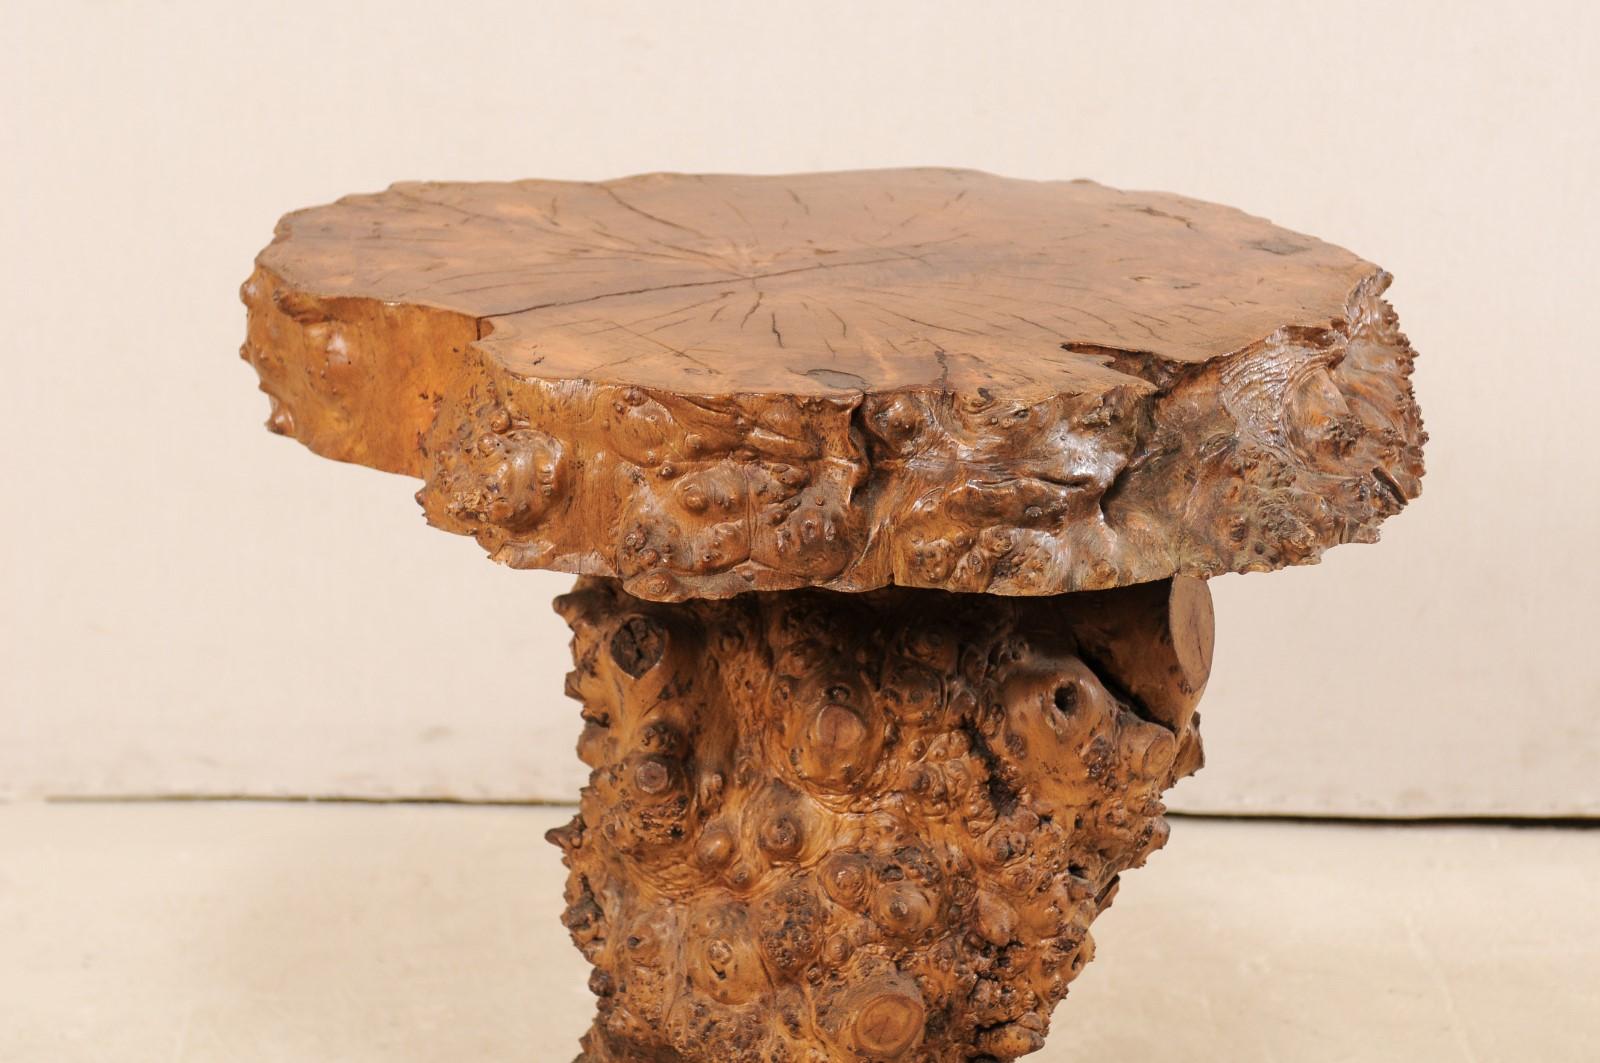 European Live-Edge Burl Side Table with Slab Top & Knobby Texture, Early 20th C. For Sale 1